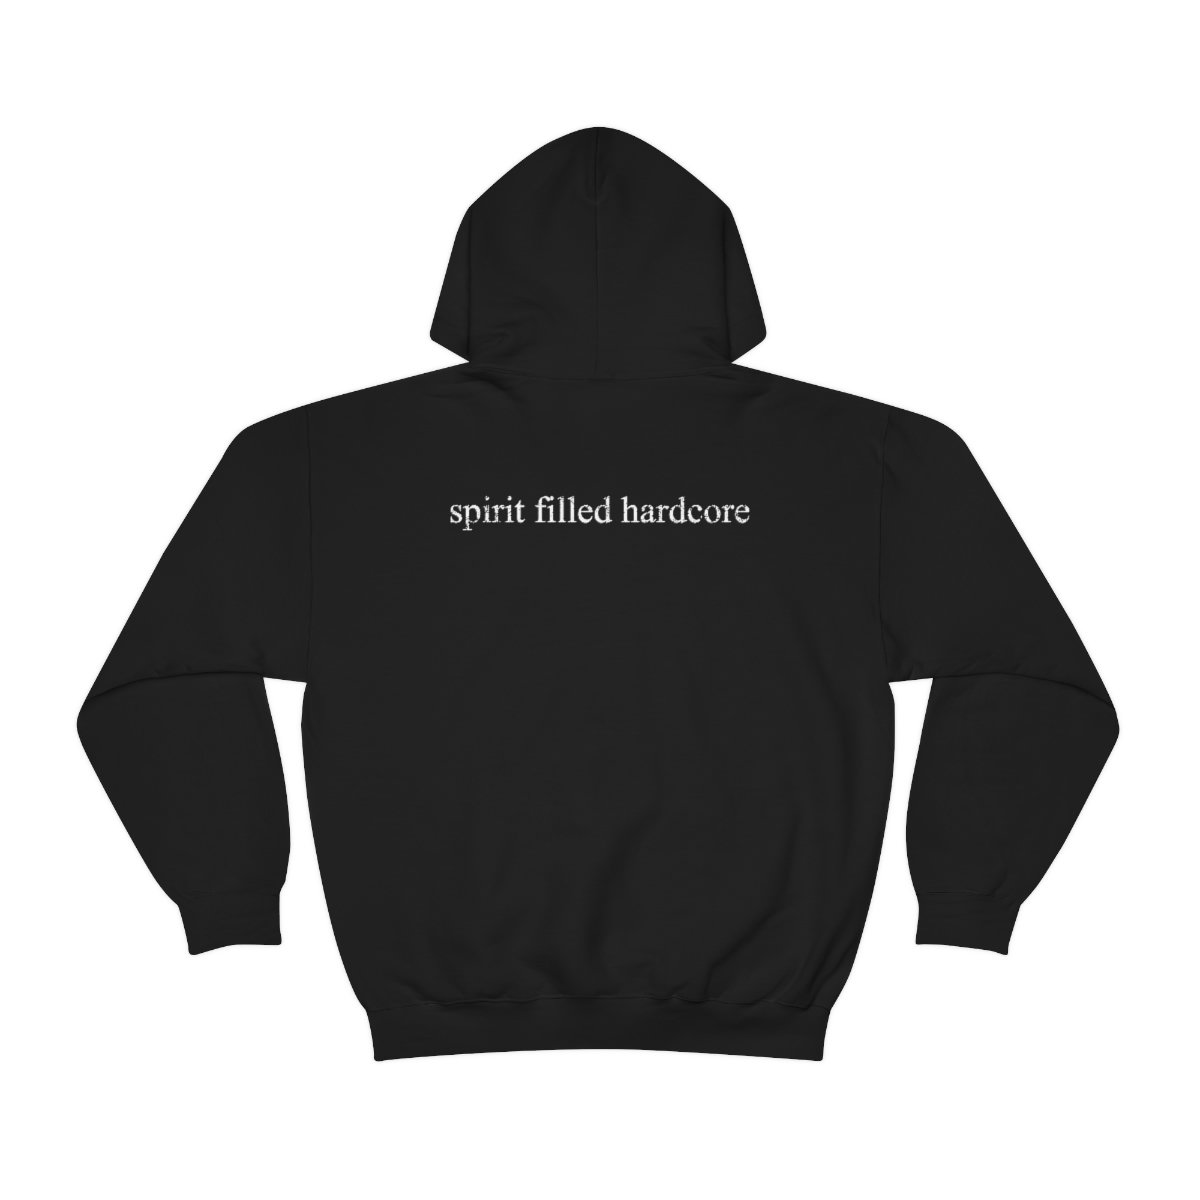 Outnumbered sfhc Pullover Hooded Sweatshirt